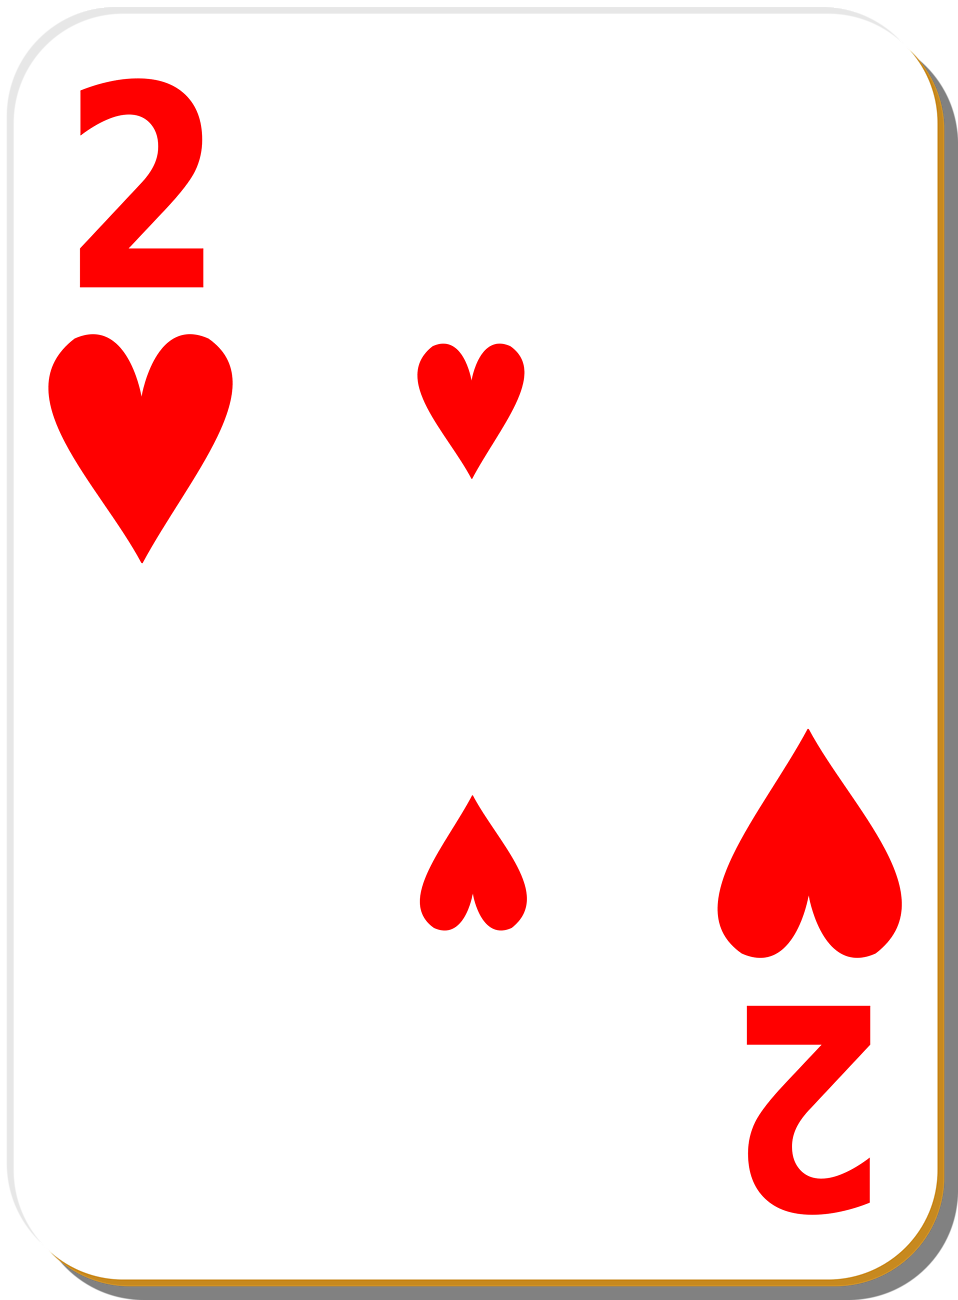 Playing Card | Free Stock Photo | Illustration of a Two of Hearts